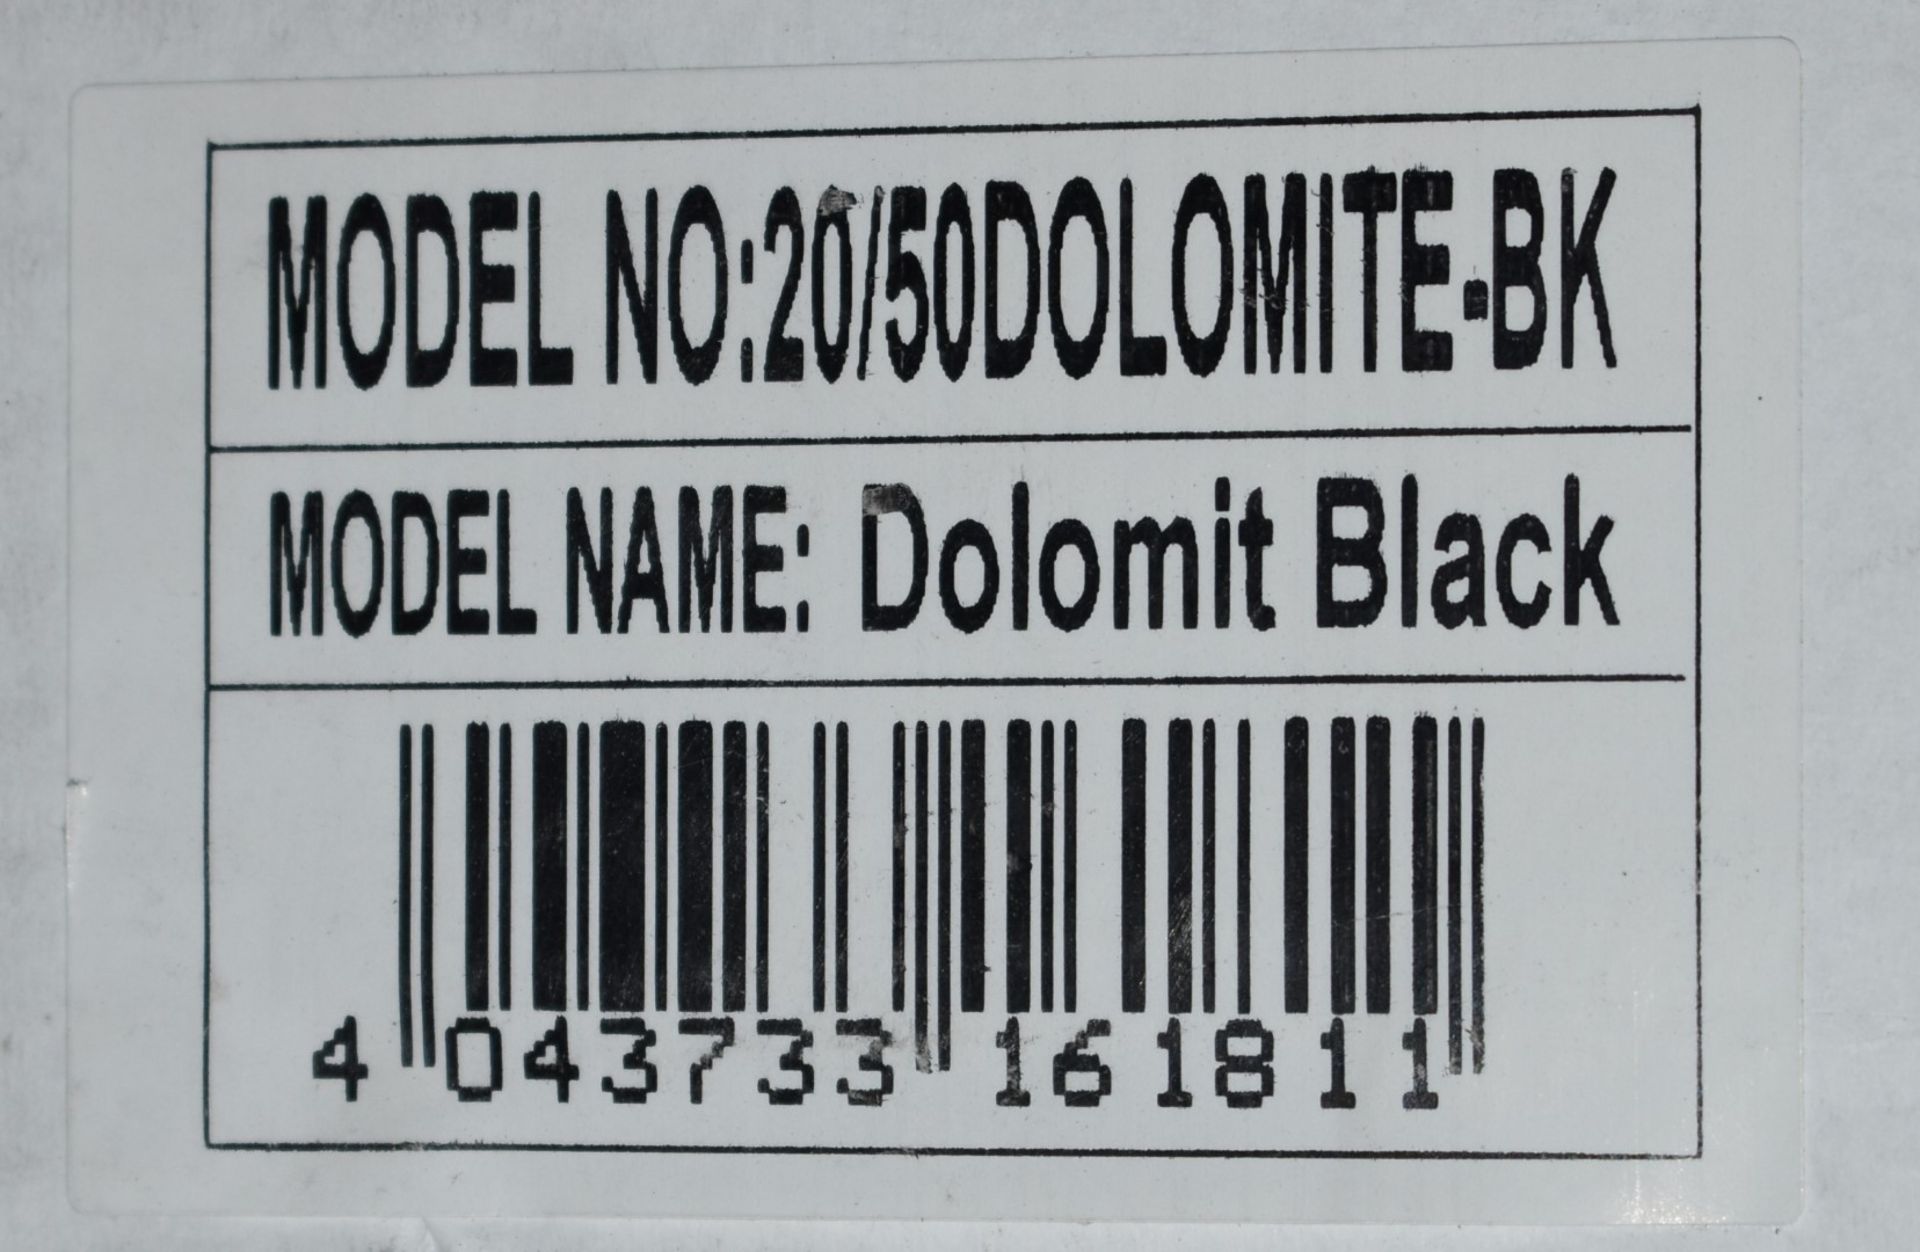 6 x Boxes of RAK Porcelain Floor or Wall Tiles - Dolomit Black - 20 x 50 cm - A Total of 8.4 m² - Image 5 of 9